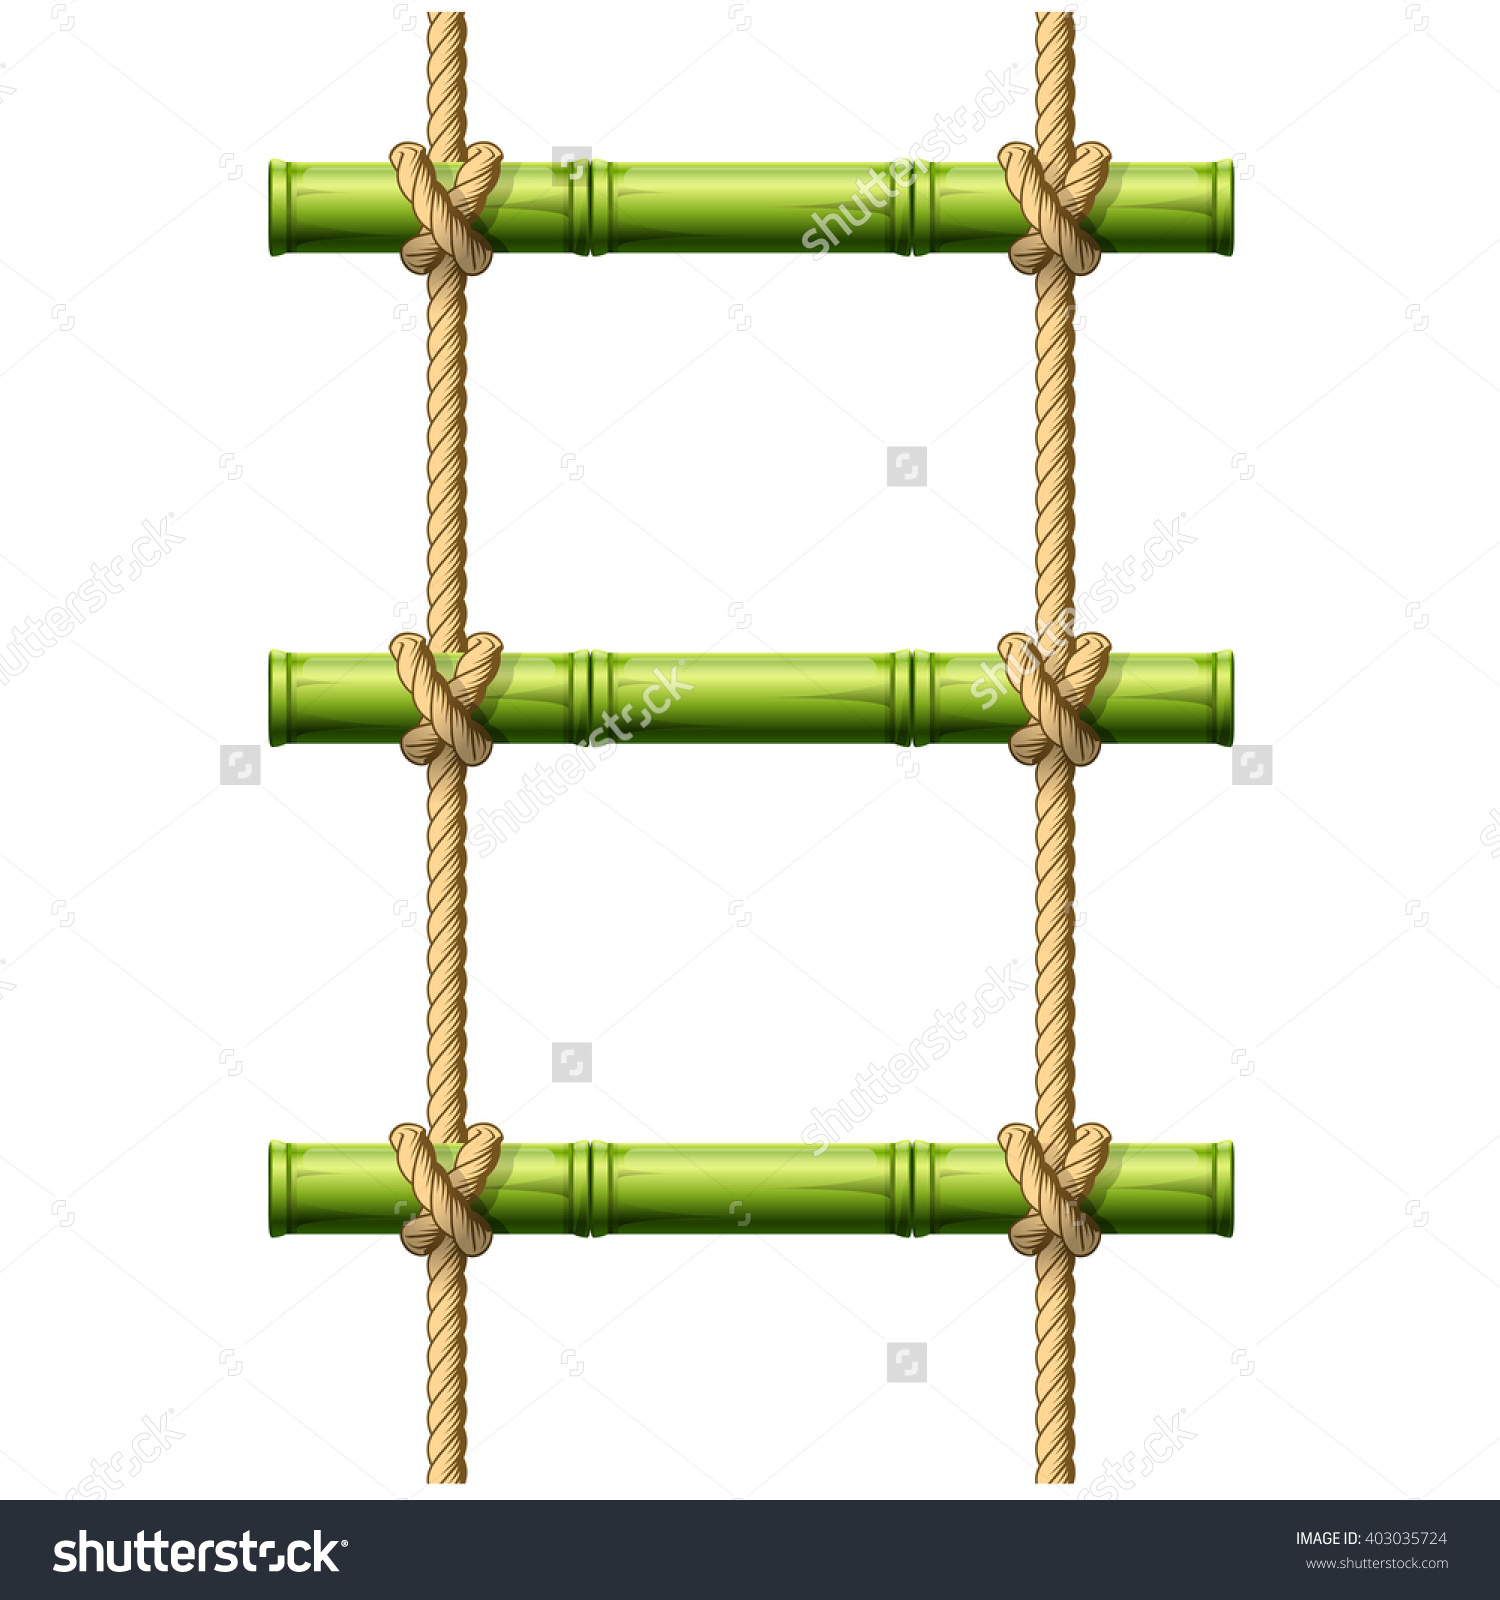 Bamboo Rope Ladder Crossbeams Connected Knots Stock Vector.